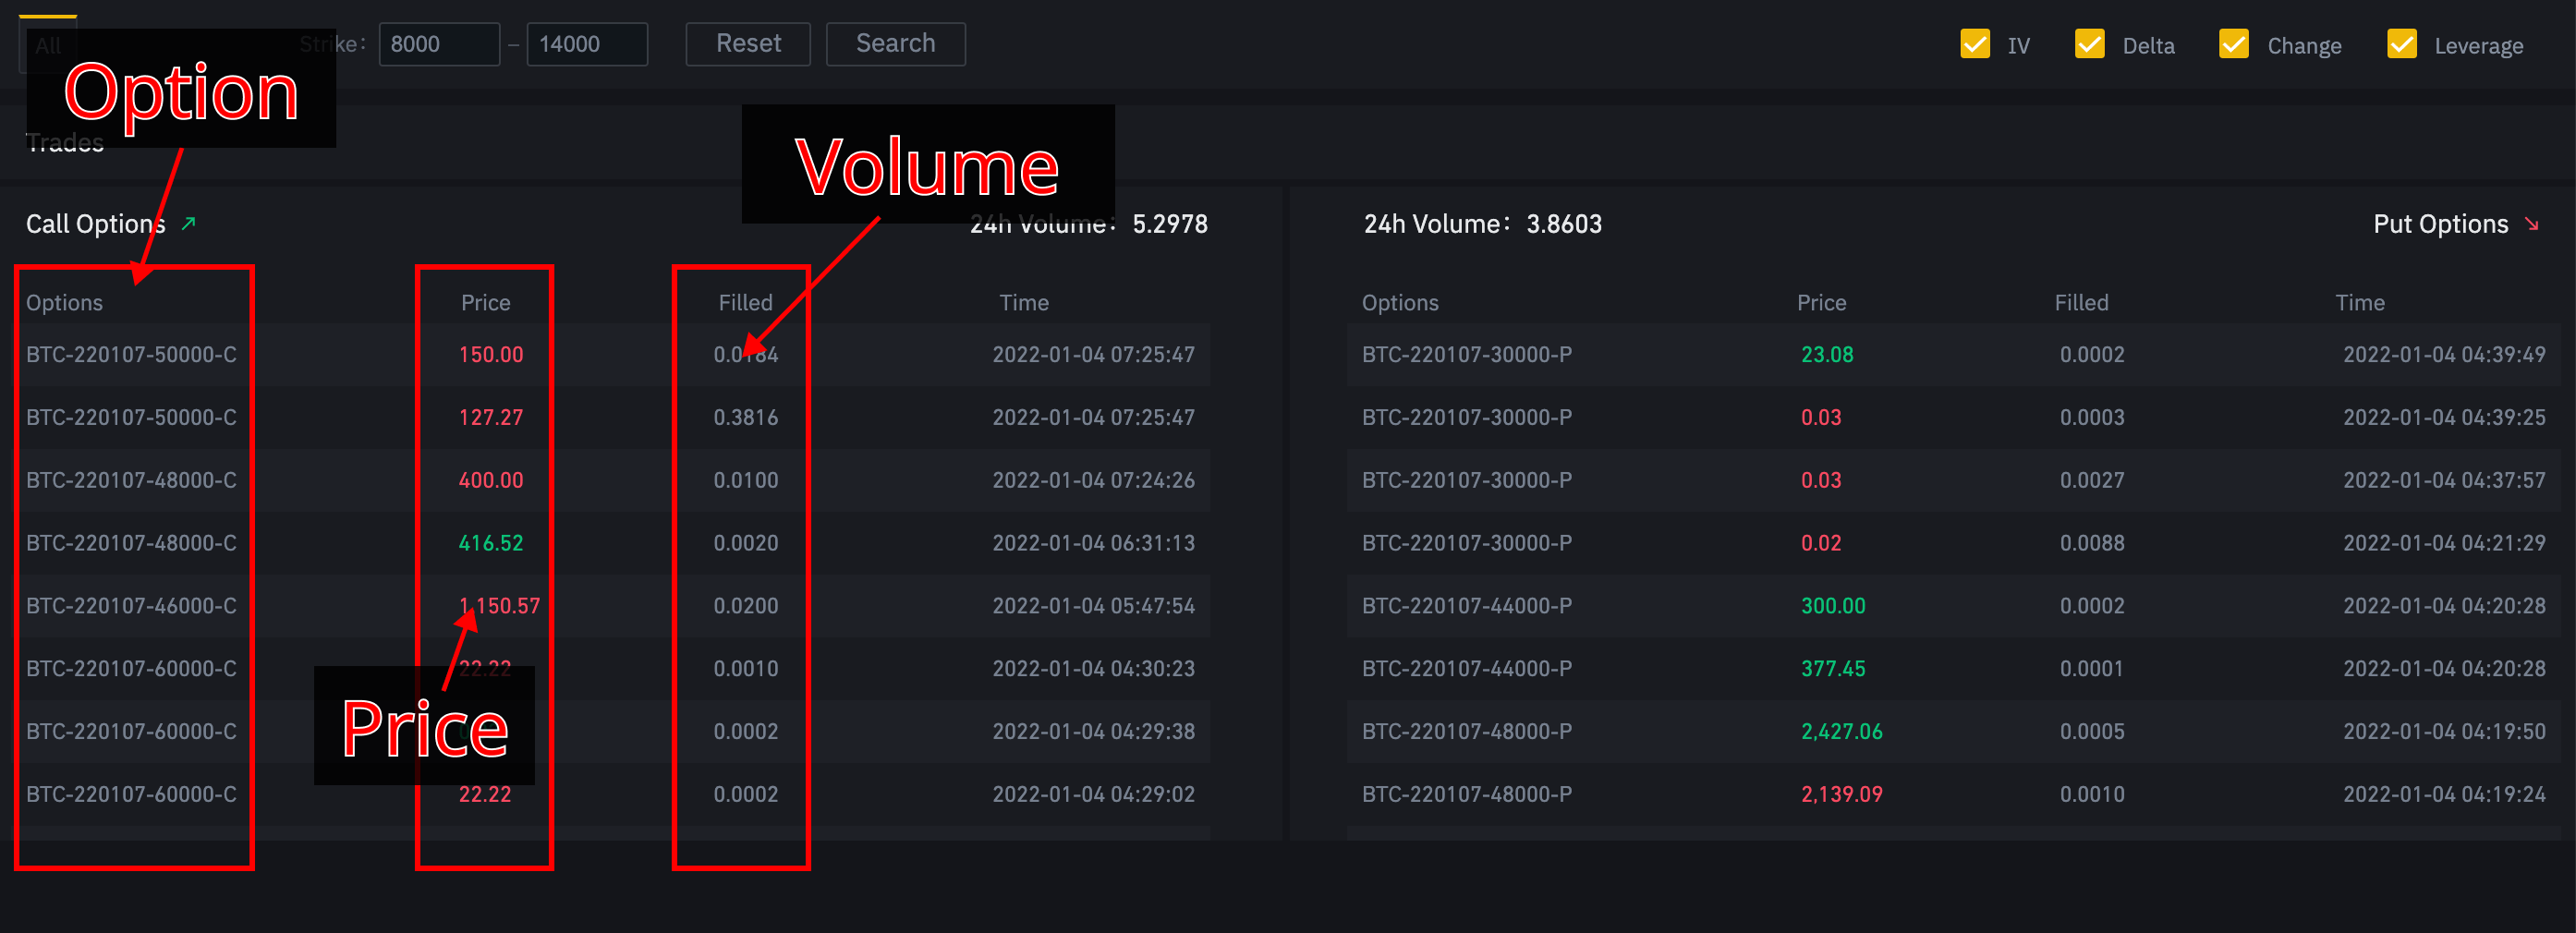 Overview of Vanilla Options. An option is defined by its parameters such as strike price and settlement date. Each option is shown with price and volume. For example, the top element is a call option BTC-220107-50000-C with the amount of 0.0184 BTC for 150 USDT.